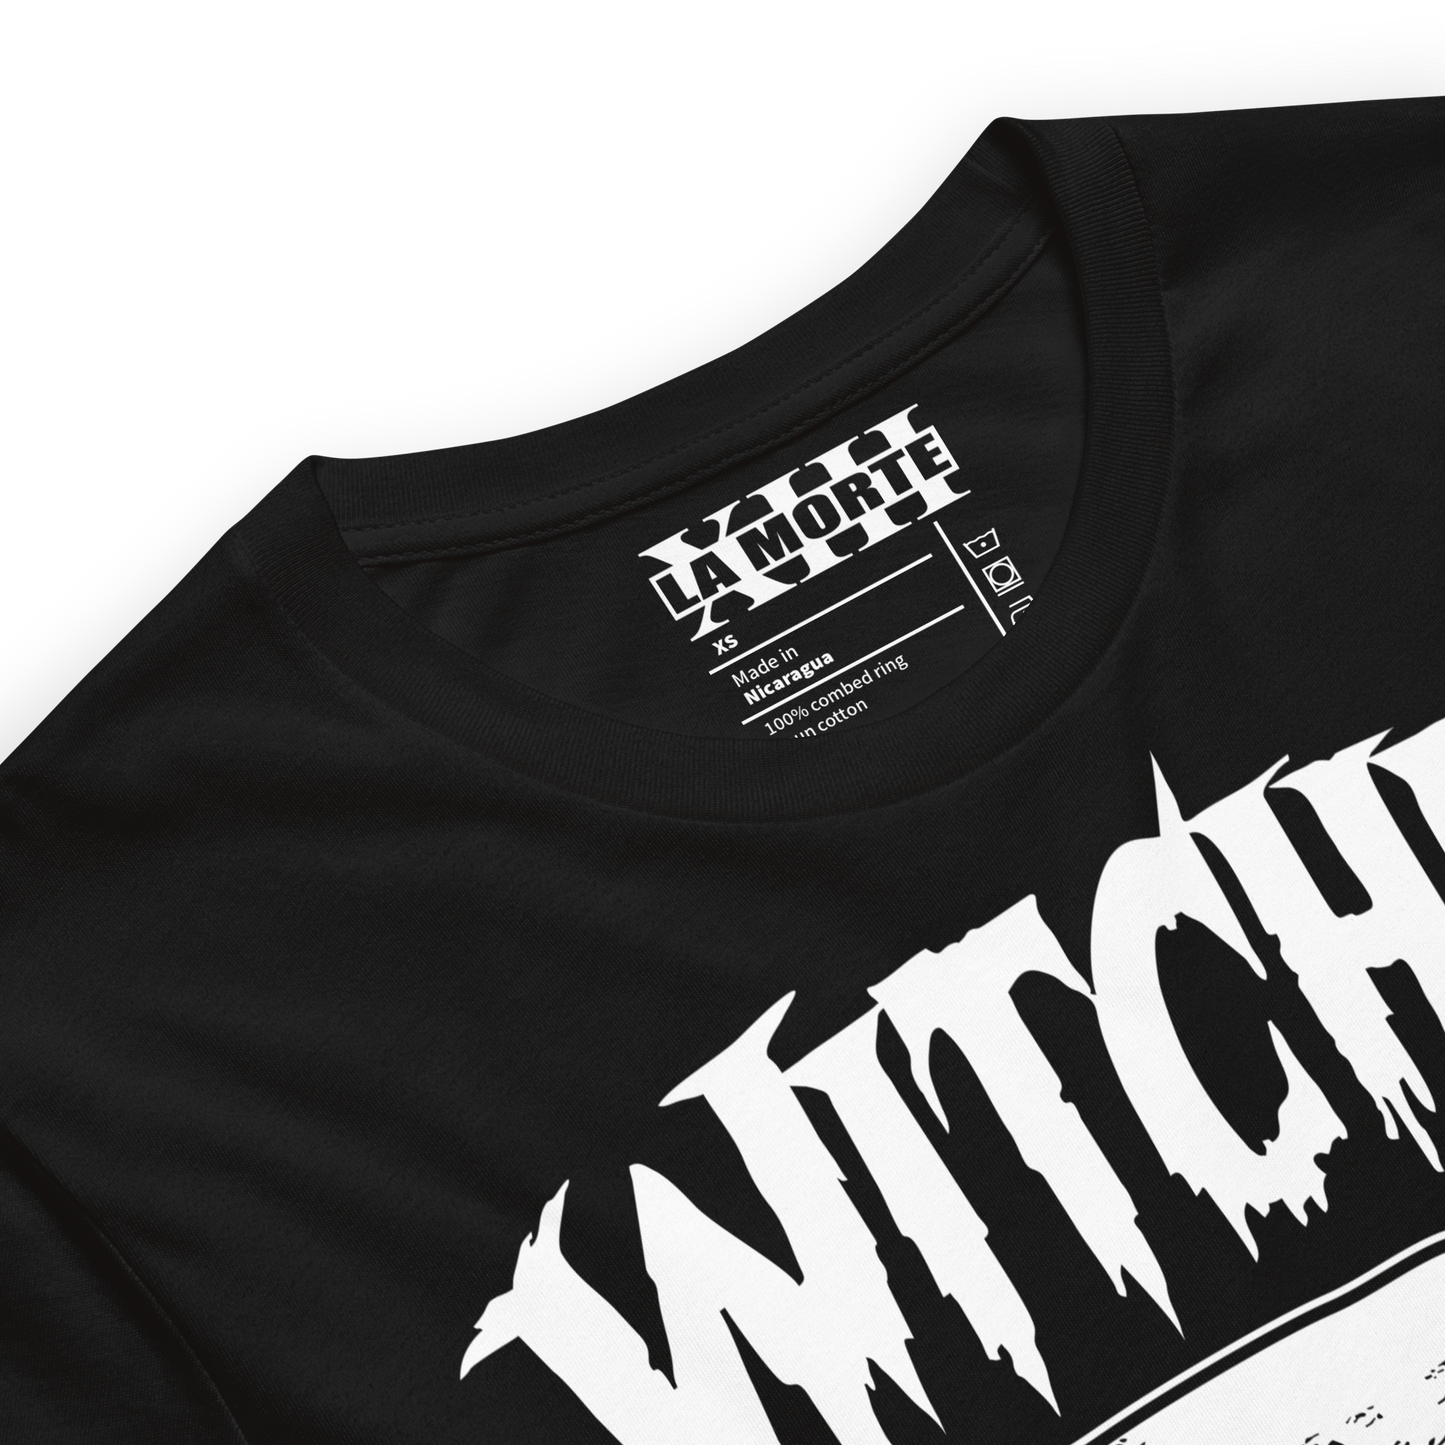 WITCHES • Unisex T-Shirt